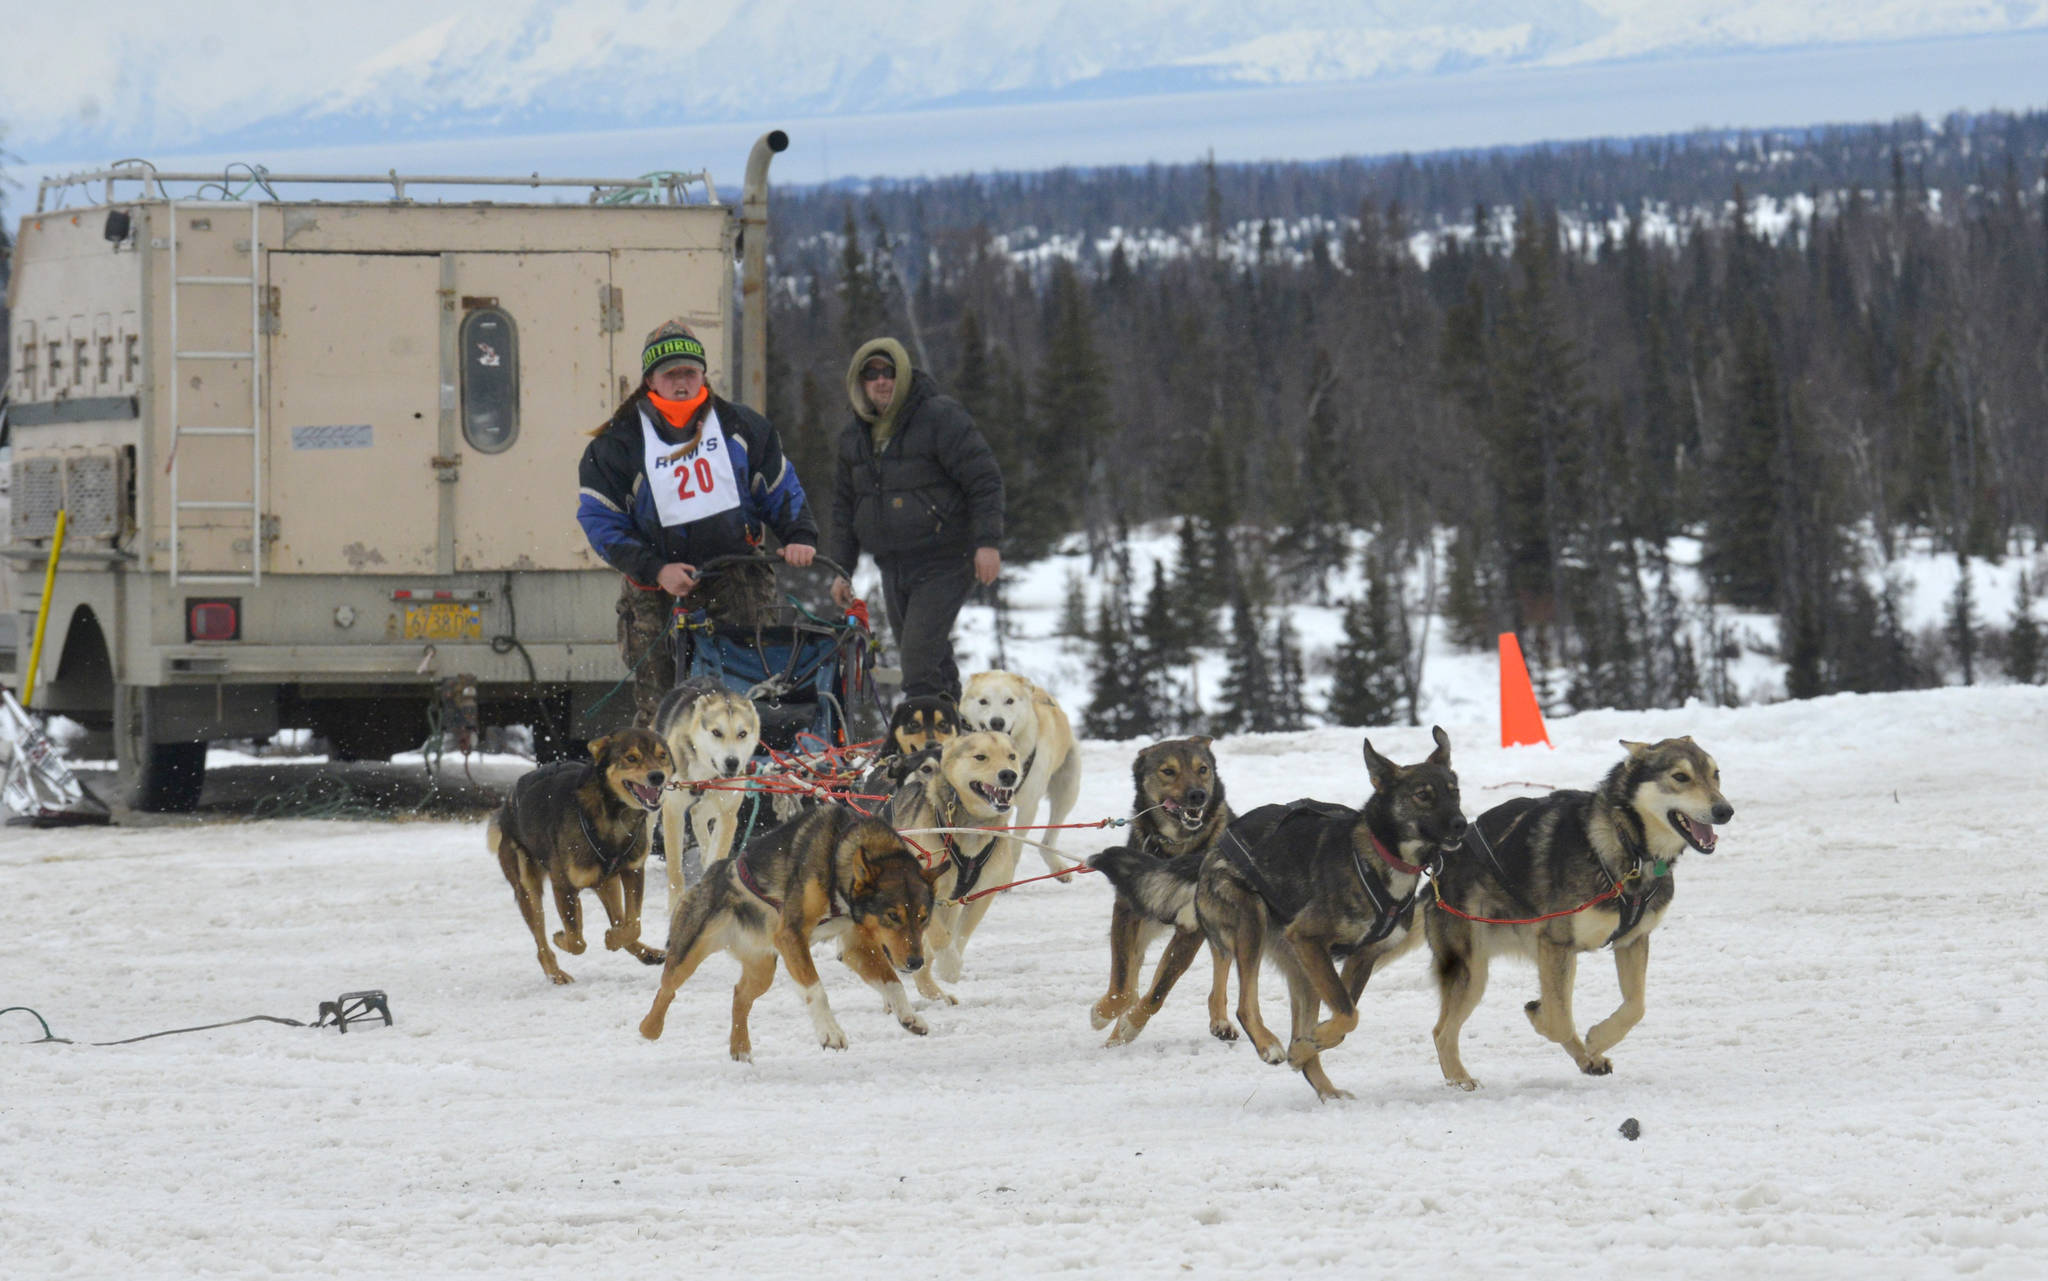 Musher Leah Gifford takes off from the starting line of Freddie’s Midnight Run on Saturday, April 1 in Caribou Hills after the race’s shotgun start, where mushers race from their sleeping bags and hook up their dogs before starting on the trail. (Kat Sorensen/Peninsula Clarion).